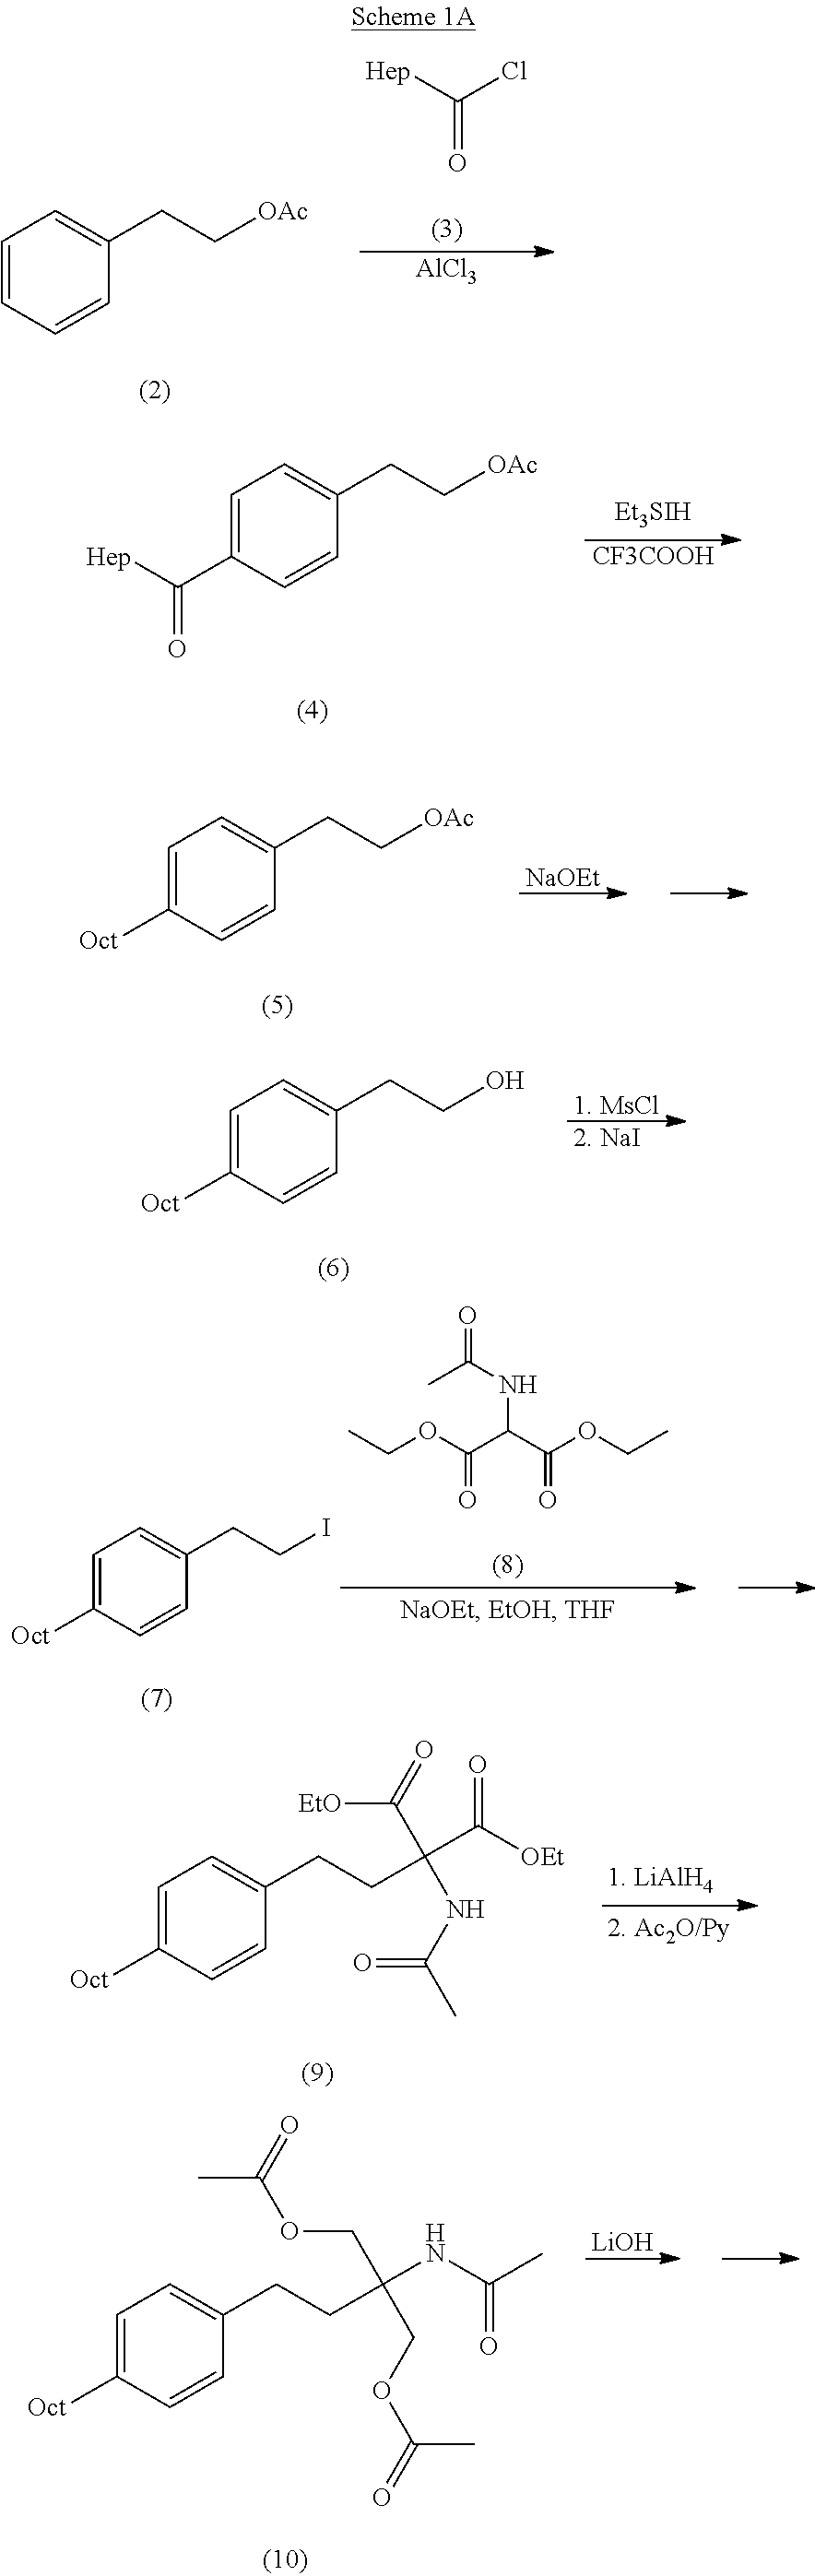 Intermediate compounds and process for the preparation of fingolimod